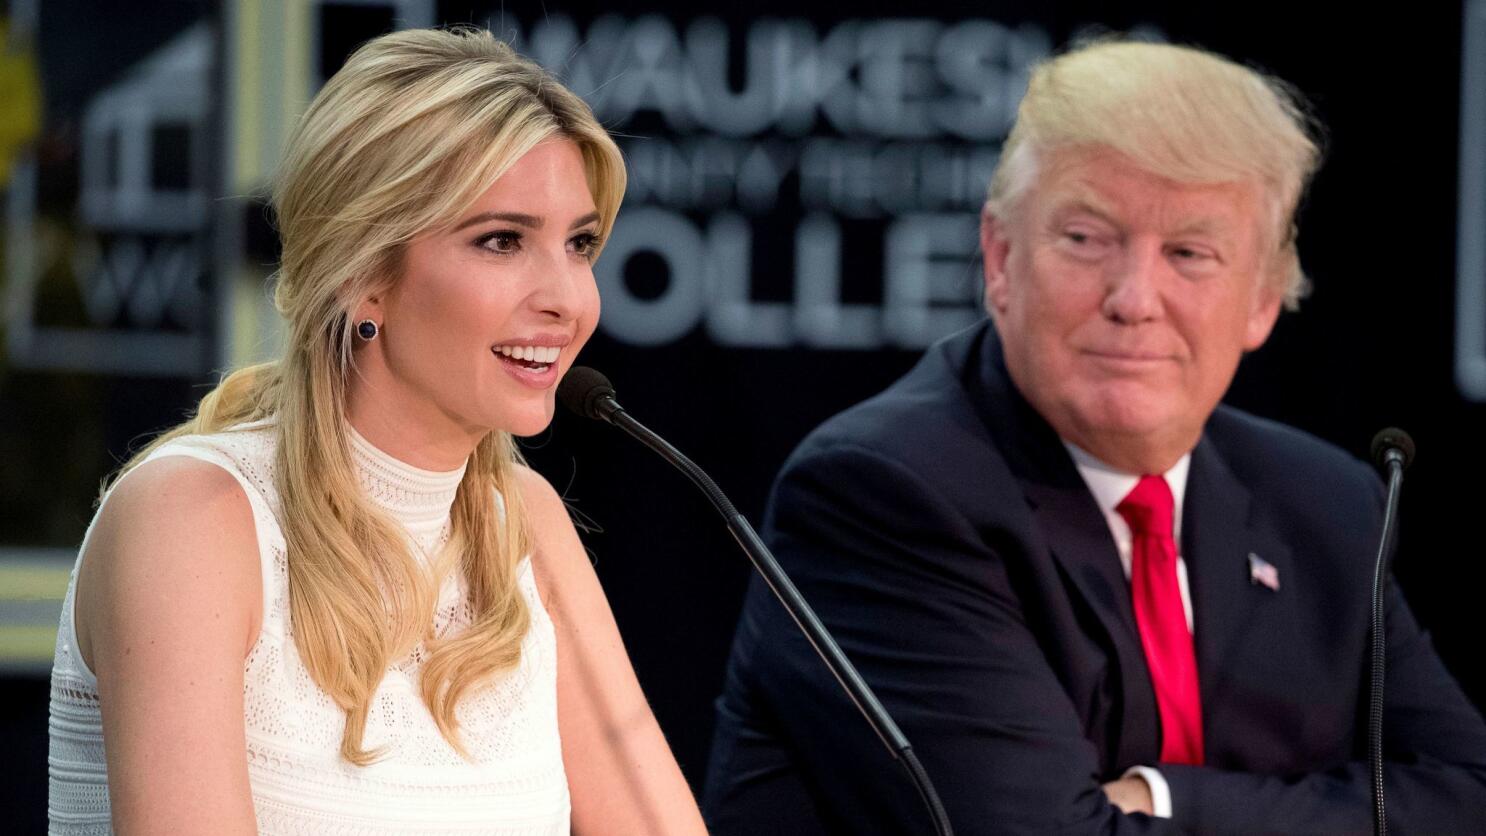 Donald and Ivanka Trump on hand as Louis Vuitton opens US factory to  produce handbags with 'Made in the USA' tags